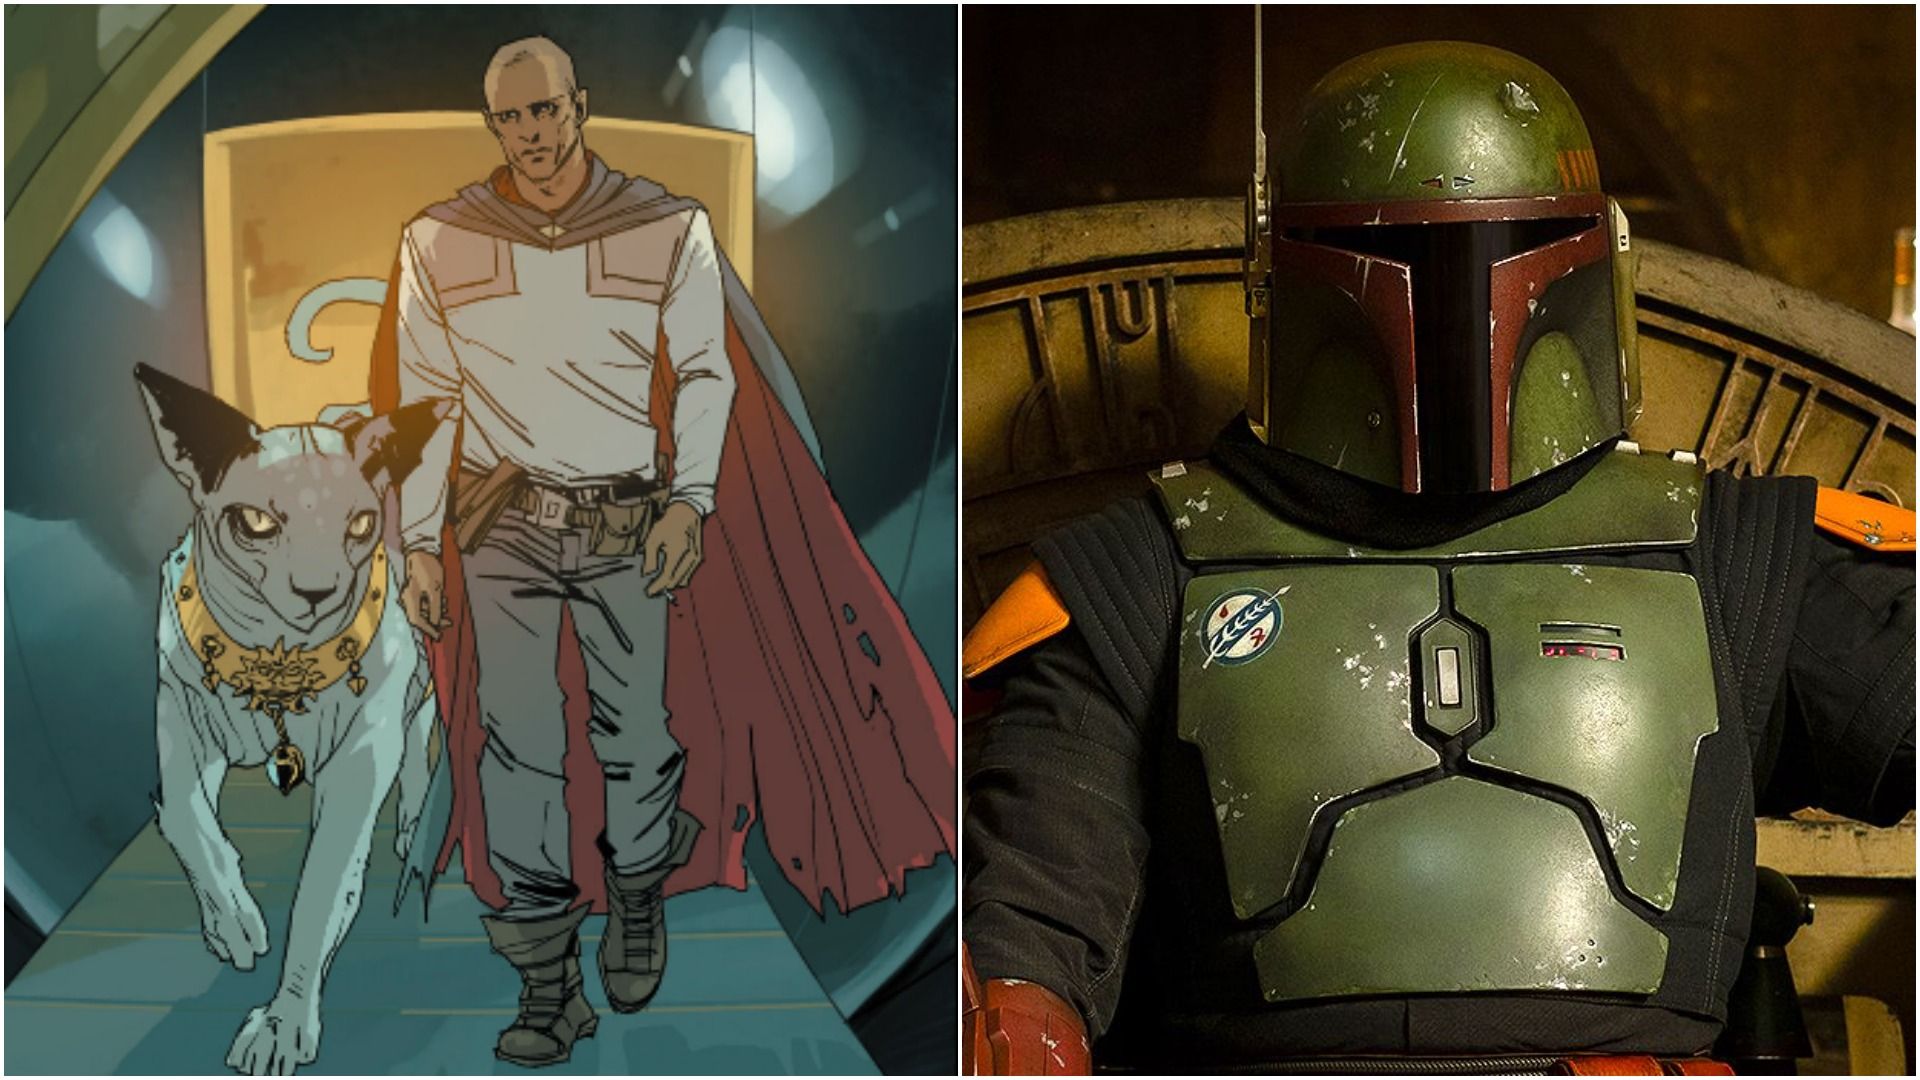 Split Image of The Will and Boba Fett